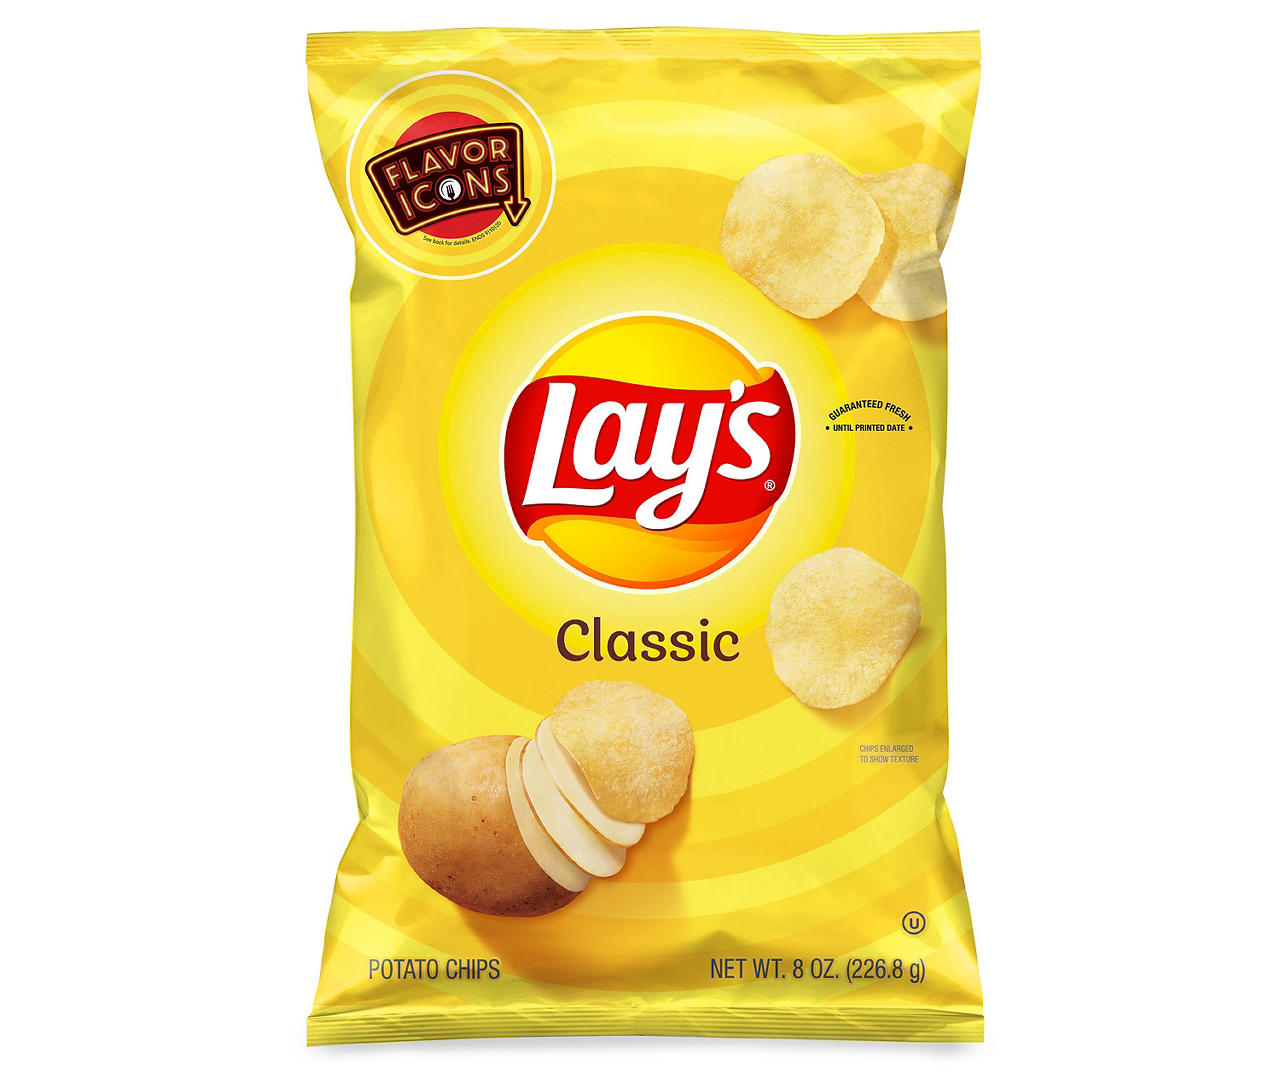 Lay's Potato Chips: 8-Oz Classic, 7.75-Oz Sour Cream & Onion, Barbeque, Wavy, Salt & Vinegar, More 3 for $4.78 ($1.59 each) + Free Pickup at Big Lots